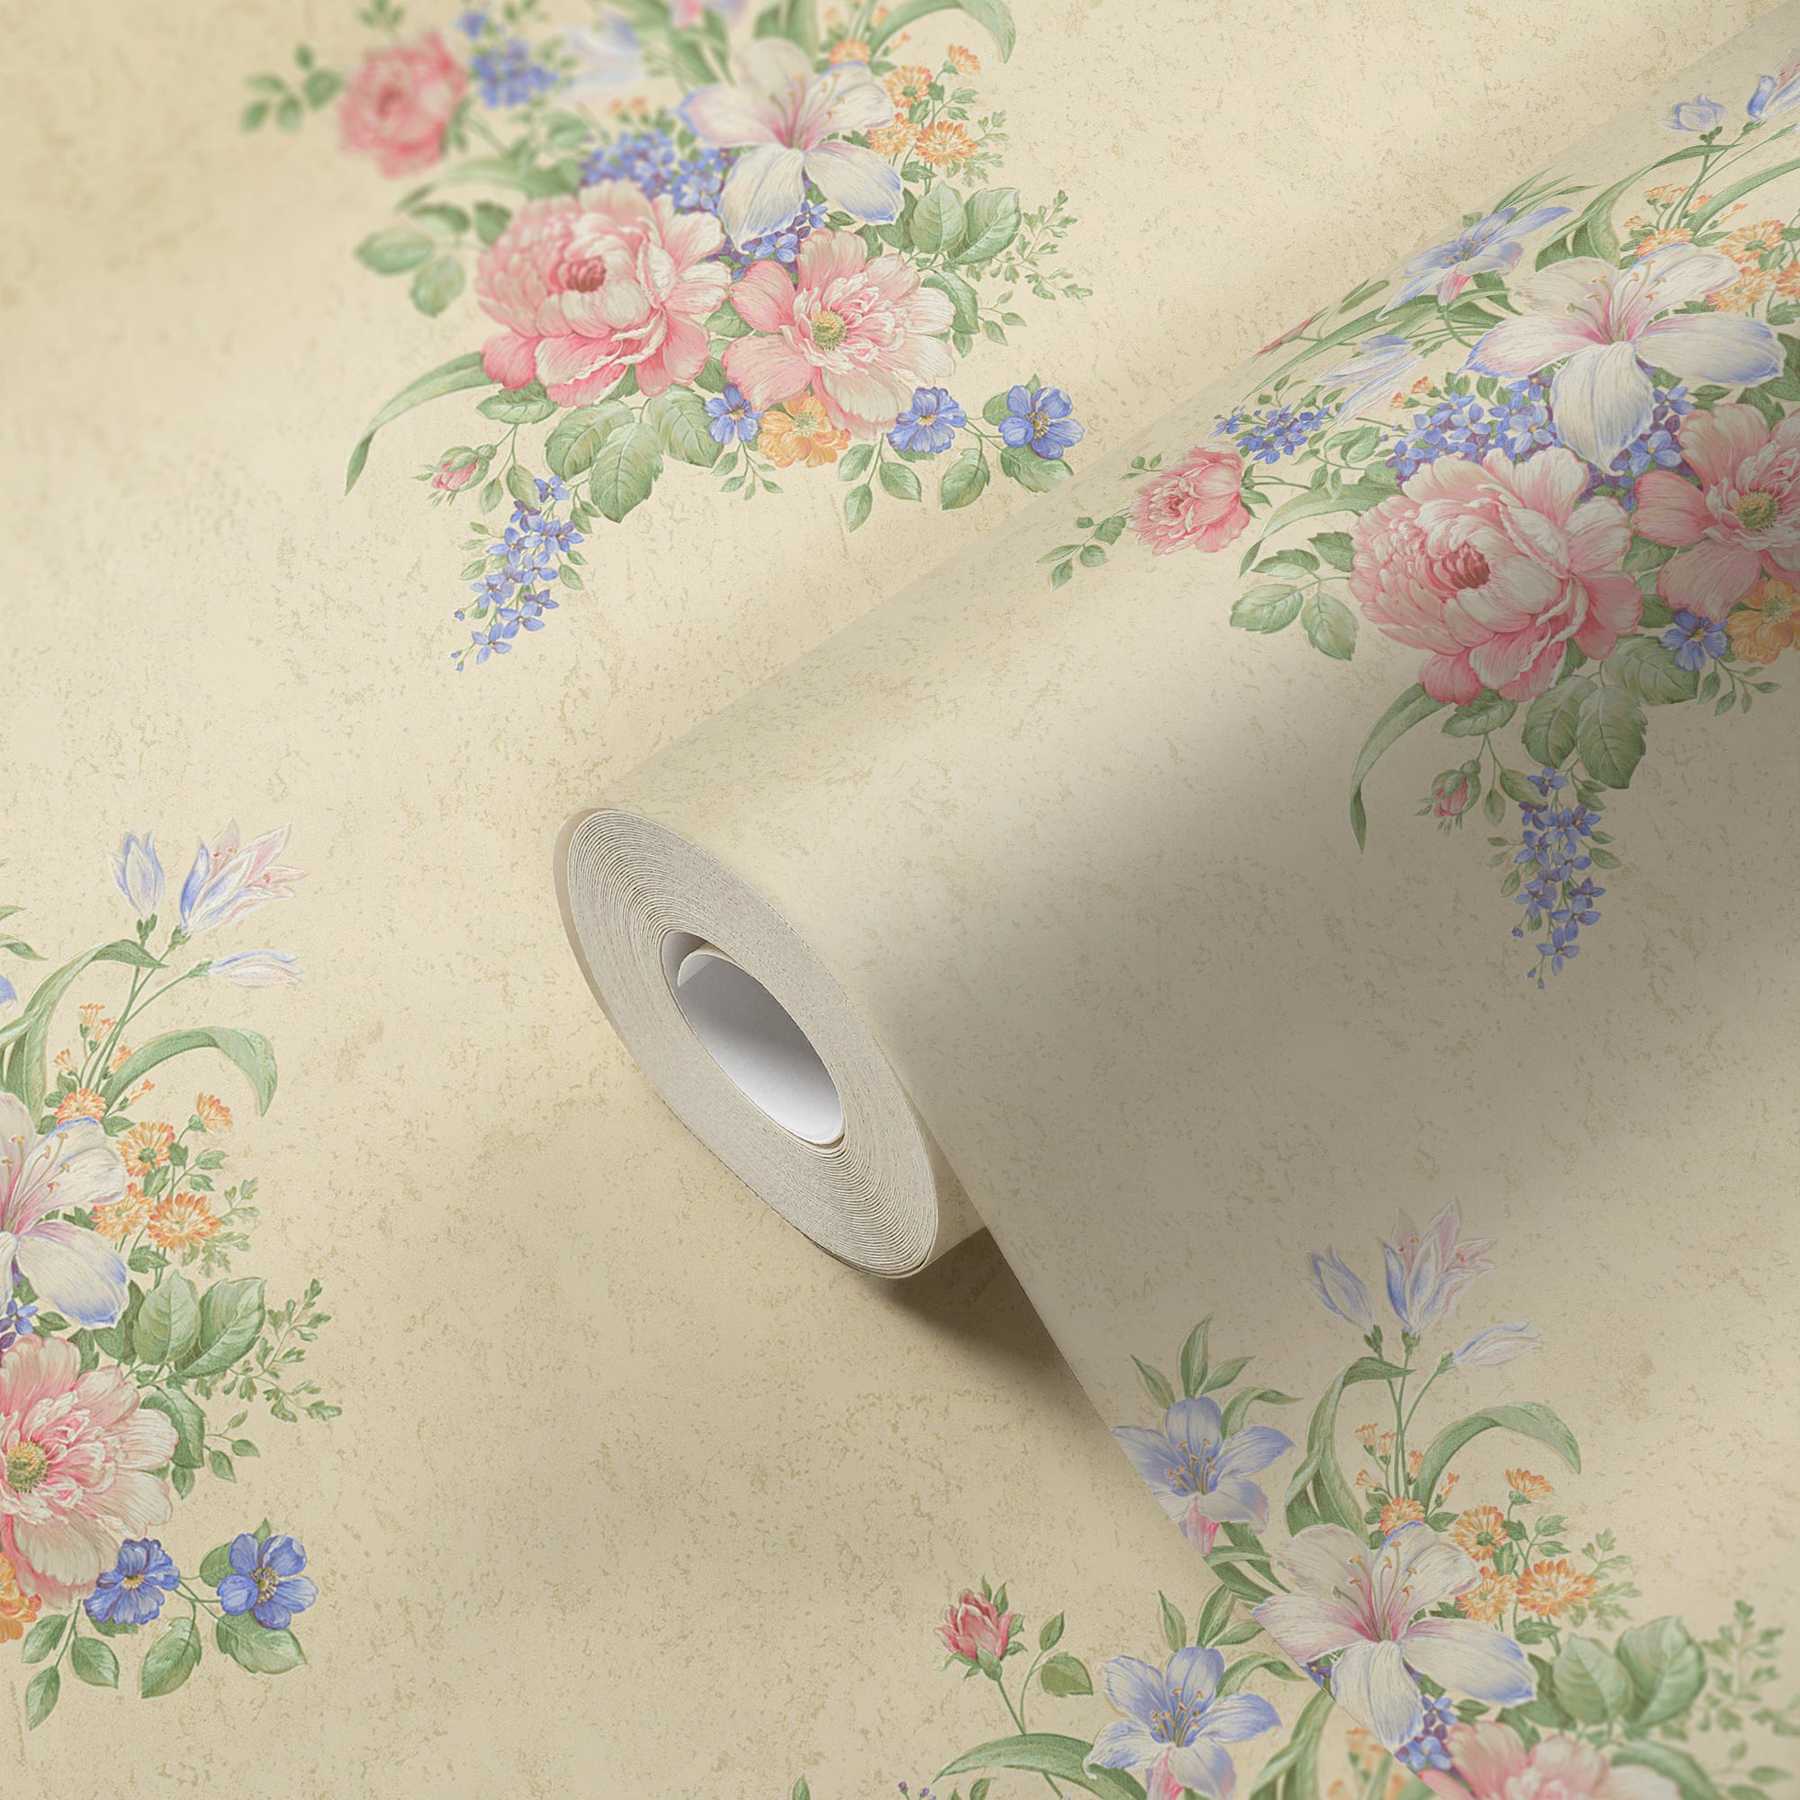             Non-woven wallpaper floral ornaments & textured pattern - cream, green, pink
        